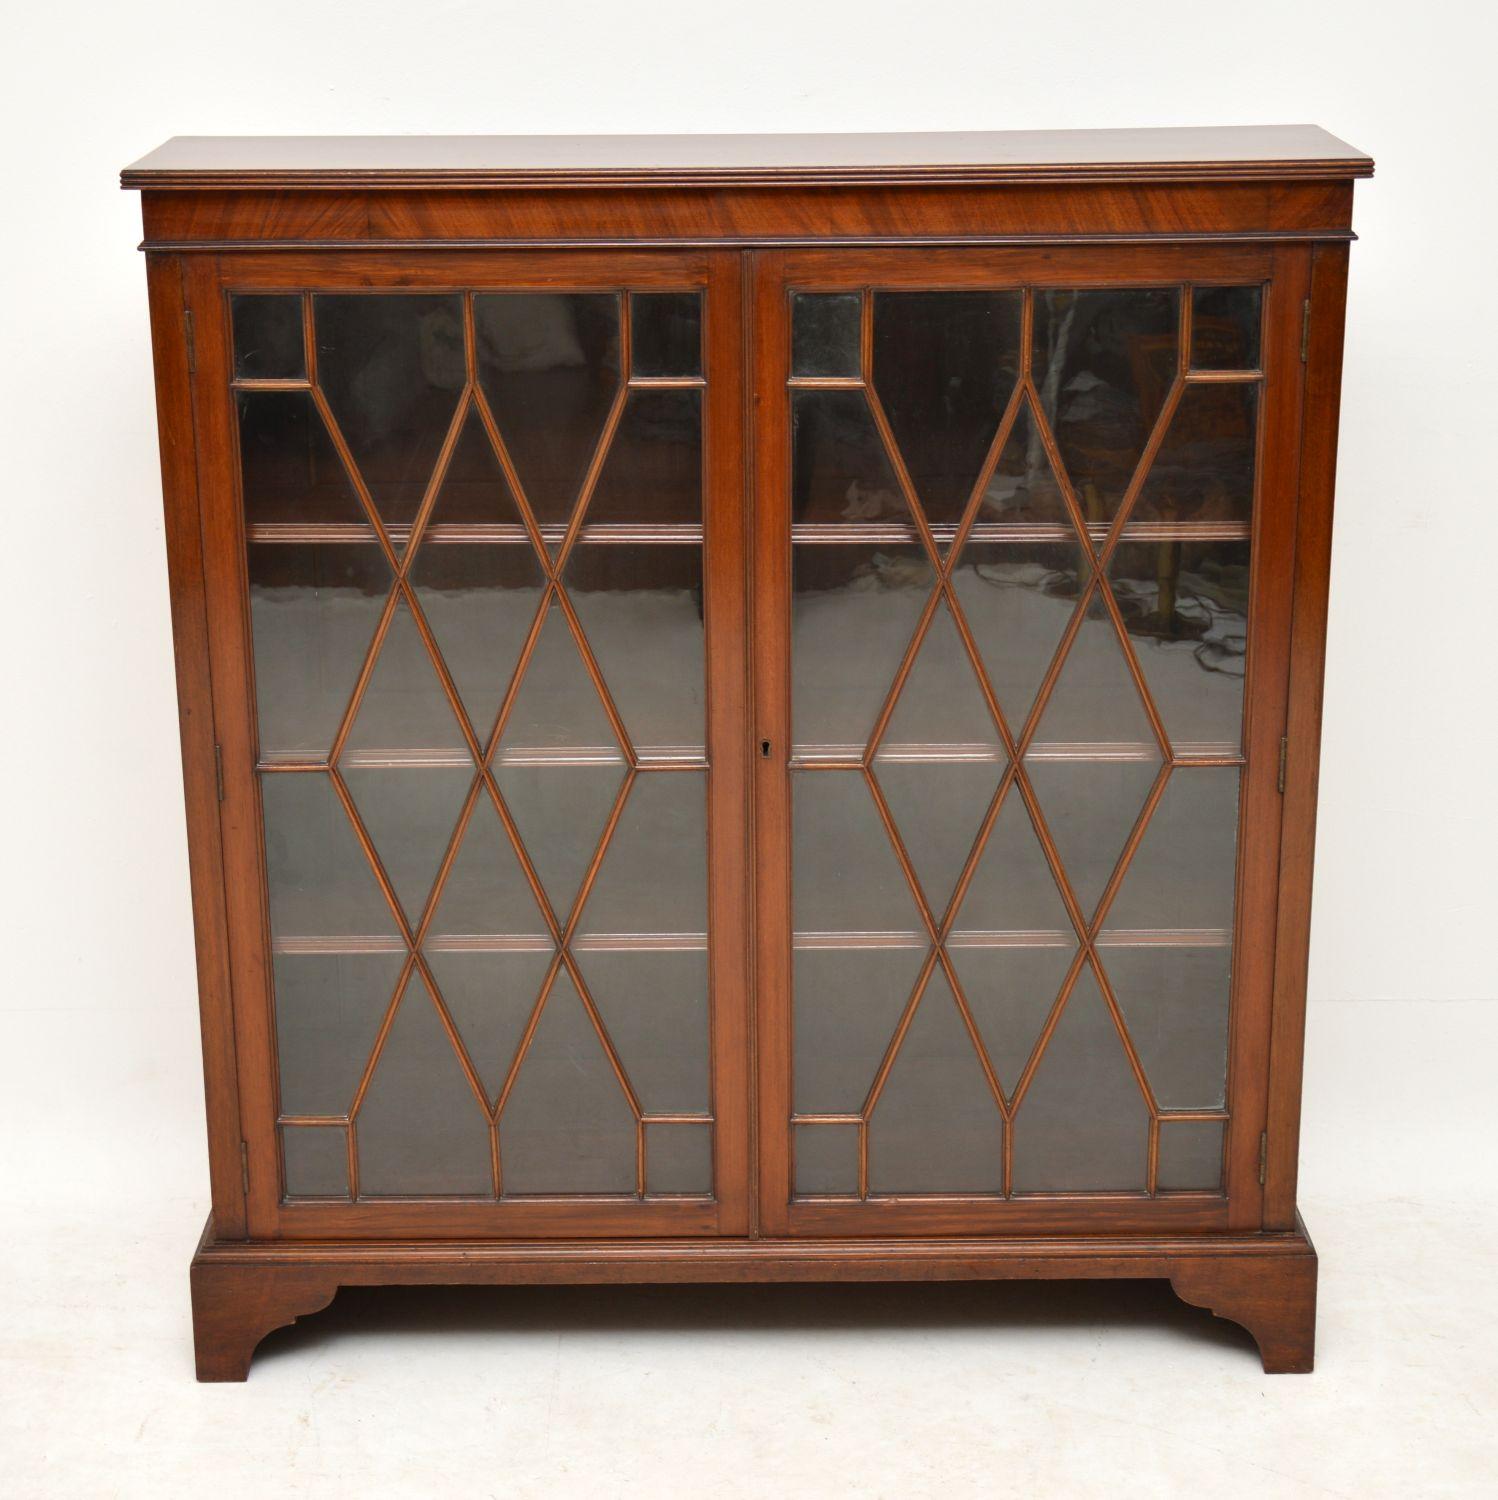 Fine quality antique Edwardian mahogany bookcase in excellent condition and dating to circa 1910 period. It has a reeded top edge, astral glazed doors, adjustable shelves and sits on bracket feet. This is a very elegant bookcase and slim from back